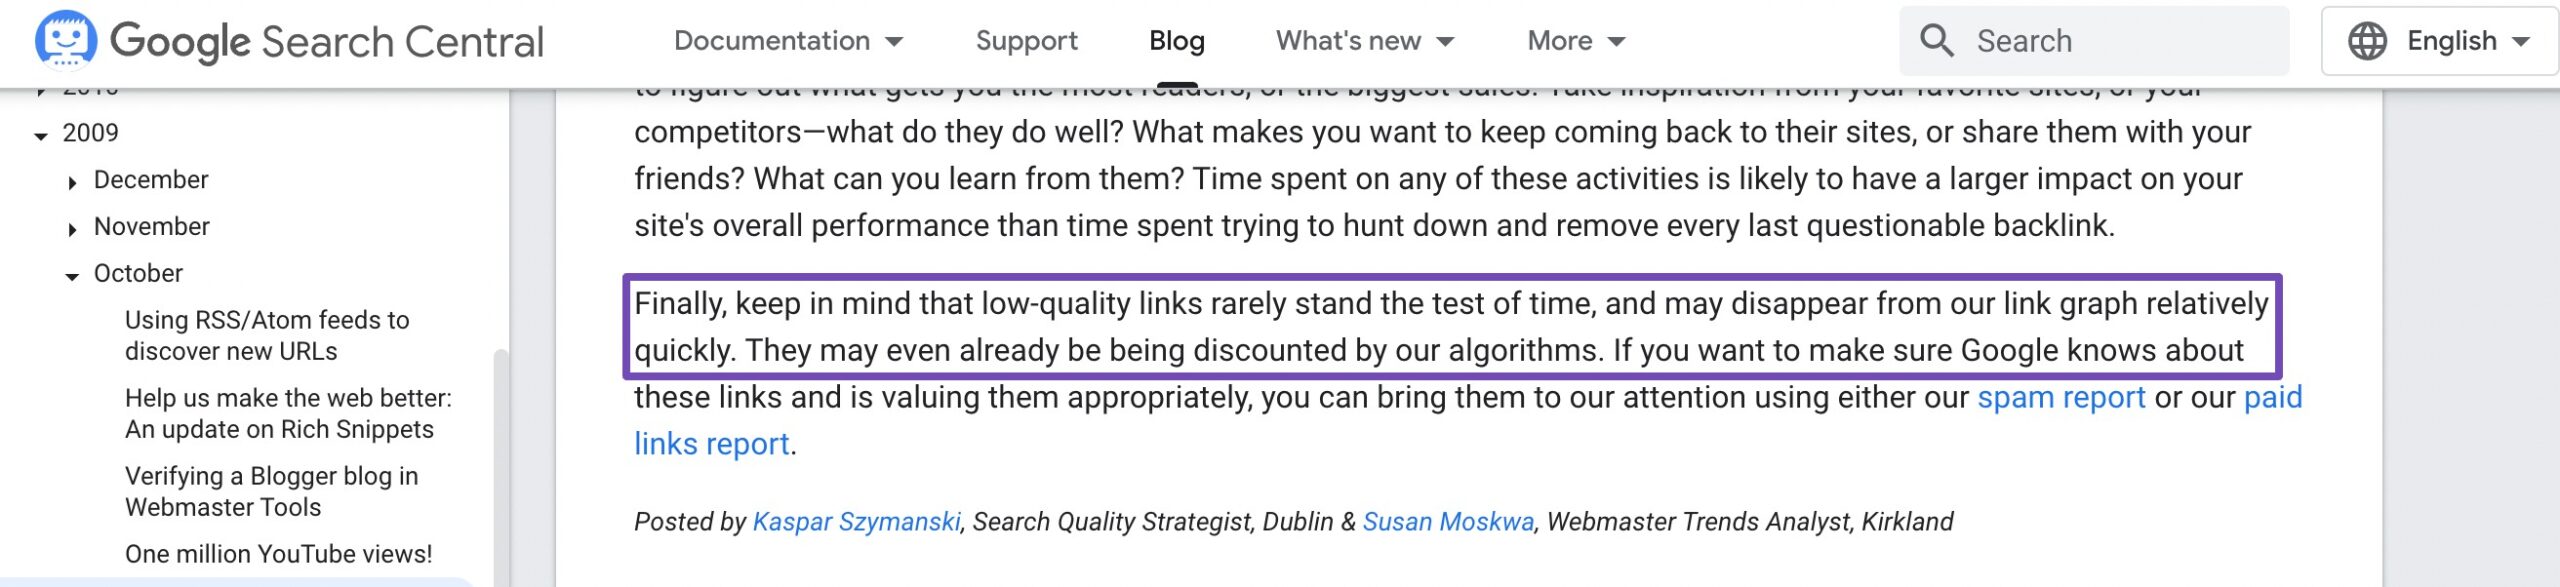 Low-quality links by Google guidelines